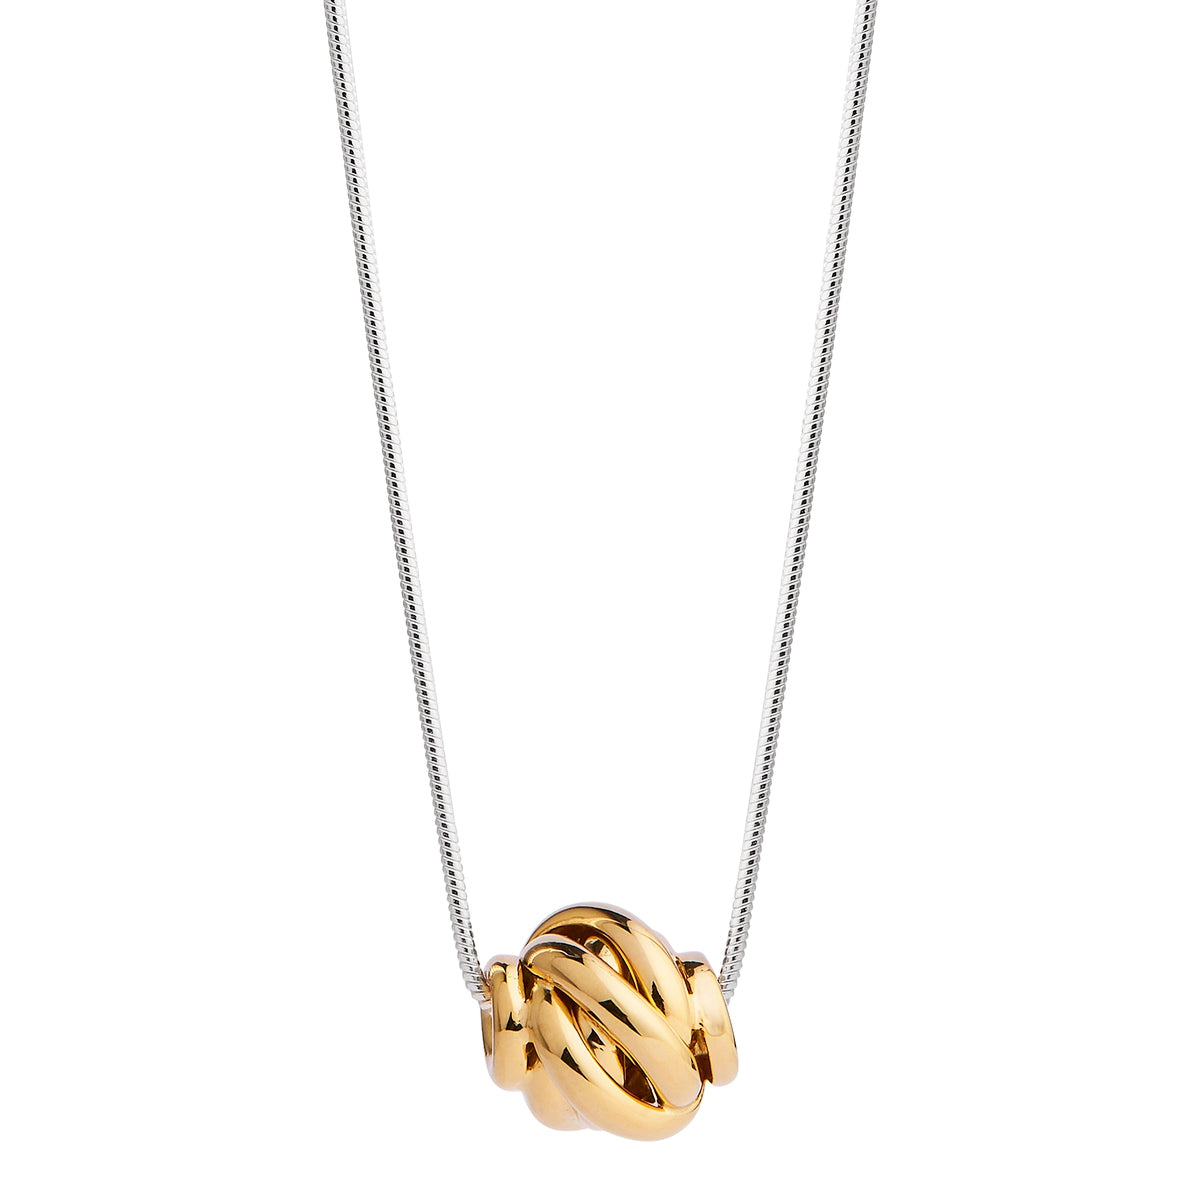 NAJO Nest Yellow Gold Necklace (45cm+ext)